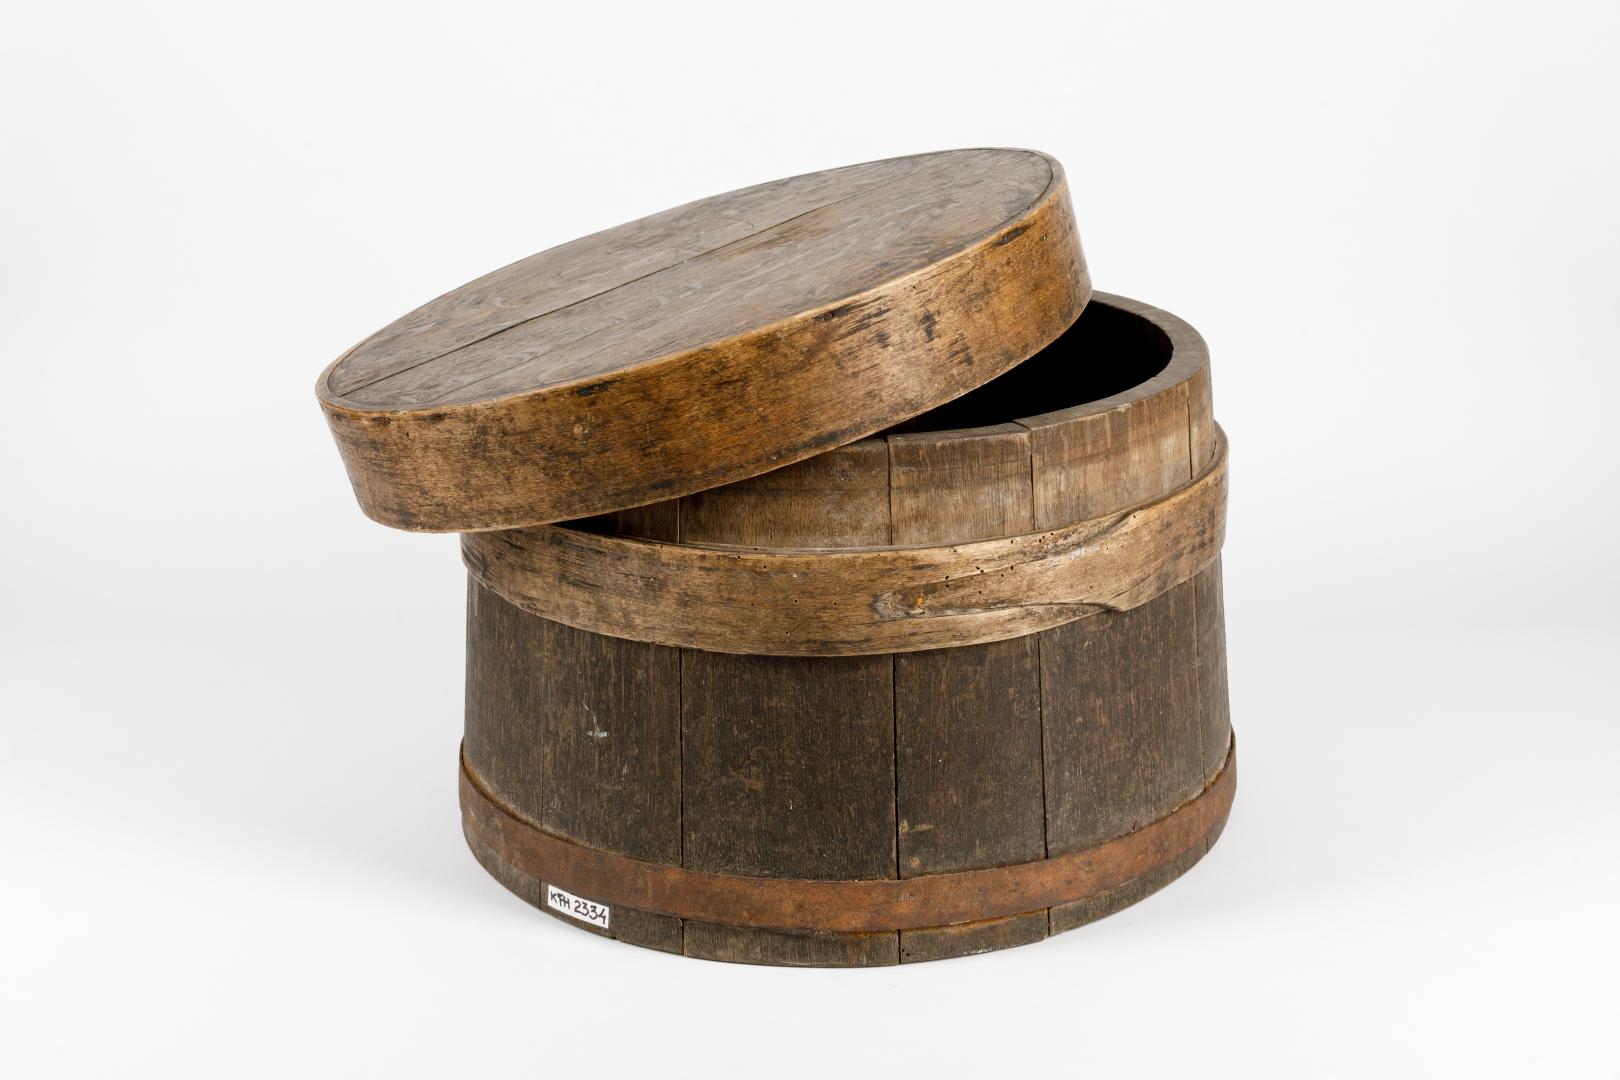 Kneading trough for baking with a lid (cone-shaped bowl with a bottom insert and a removable cover tightened by two wooden or iron hoops)